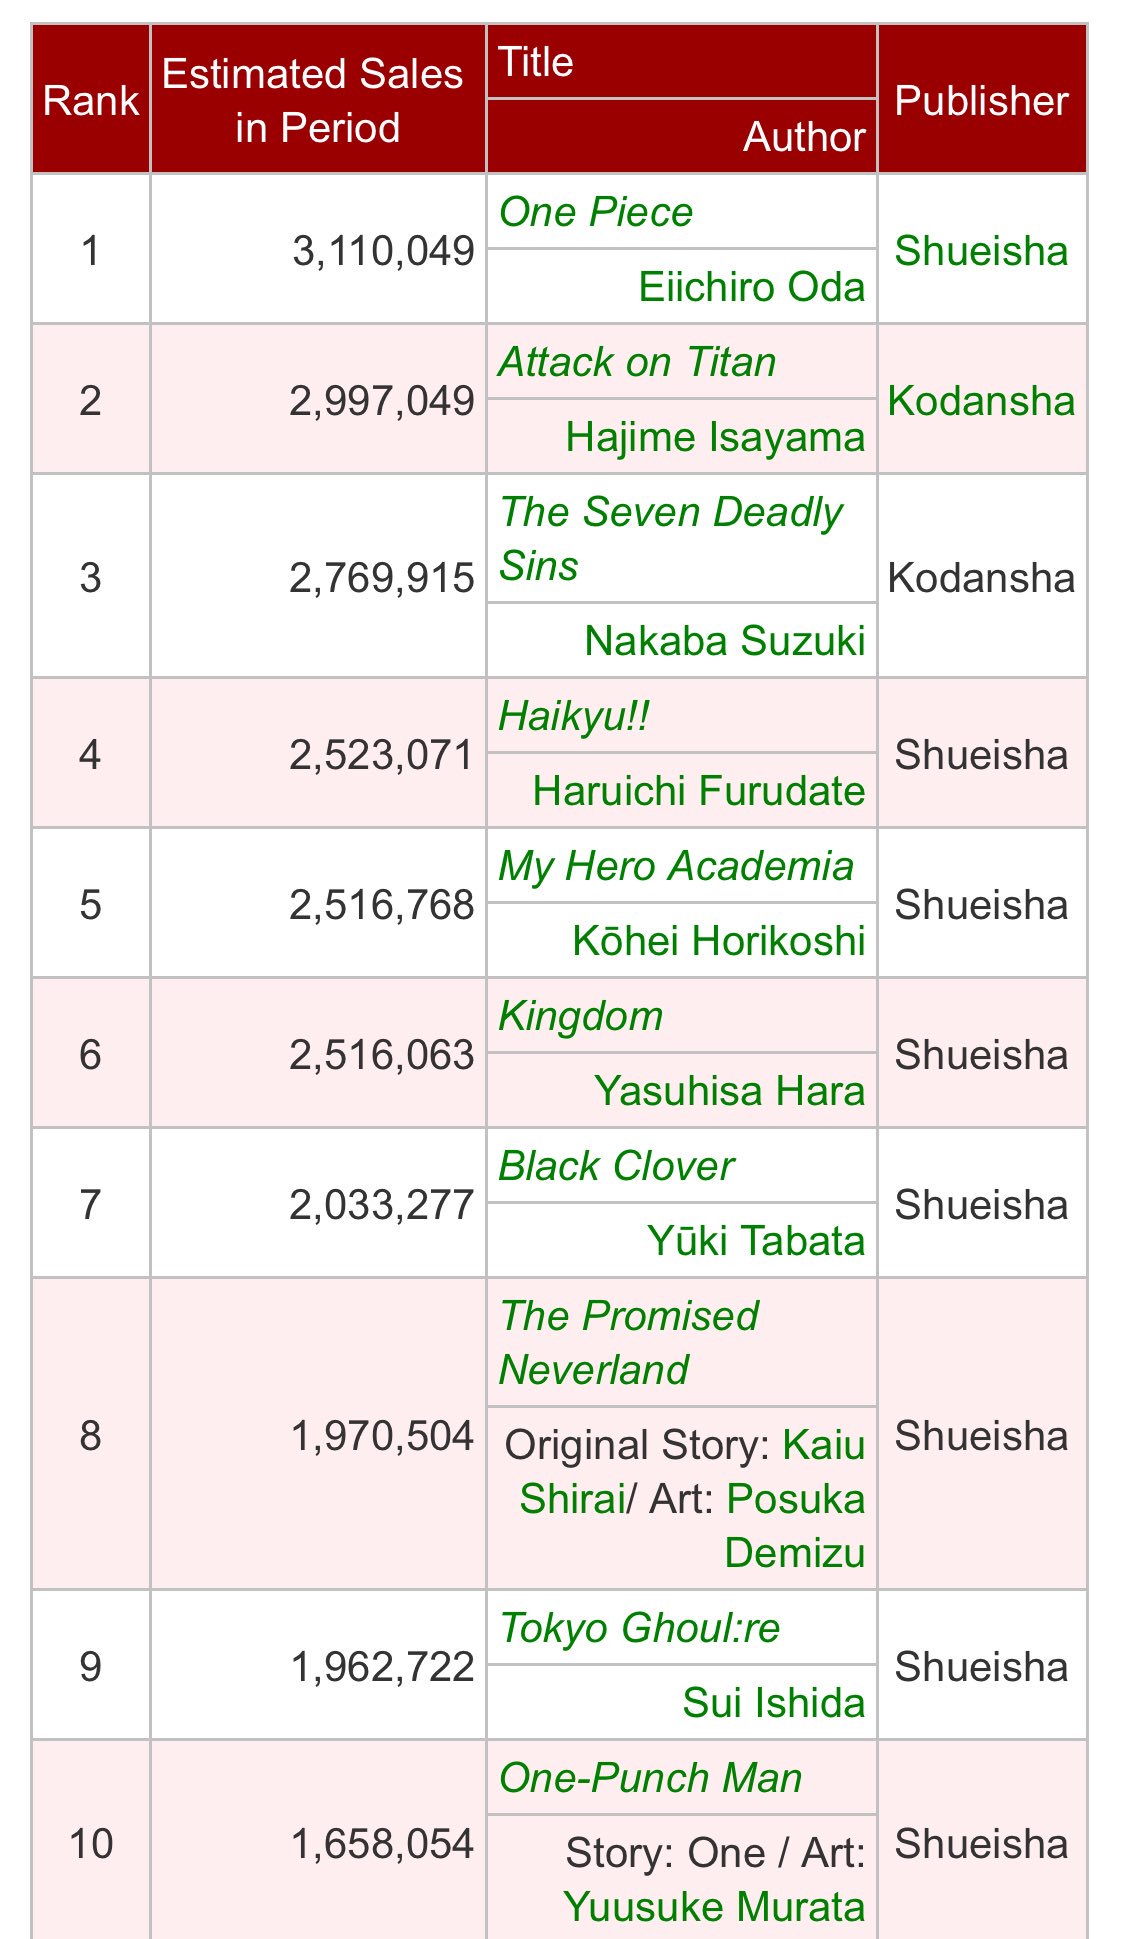 Tim on Twitter: "I forgot to cover this a while back but these were the top 10 best selling manga of the first half of 2018. It's a close race I